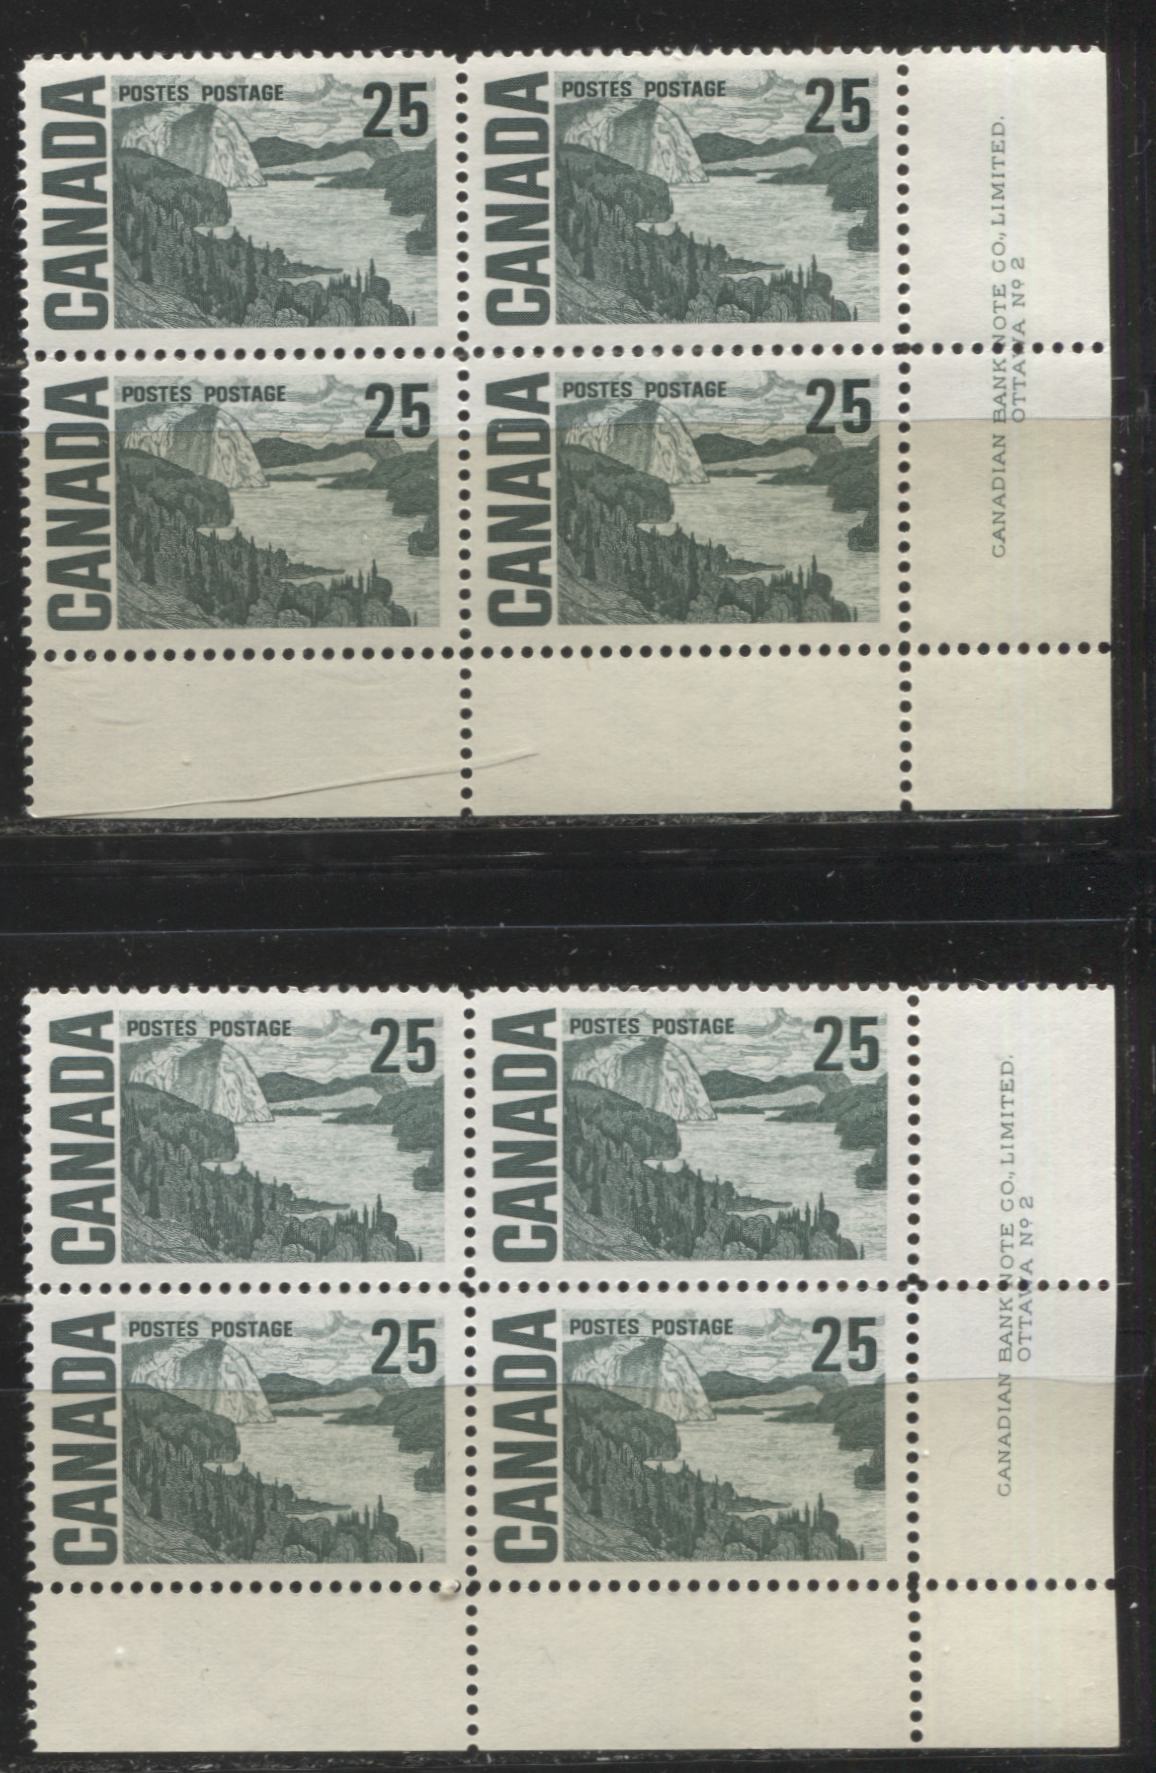 Lot 17 Canada #465 25c Dull Bluish Slate Green & Bluish Slate Green Solemn Land, 1967-1973 Centennial Definitive Issue, Two VFNH LR Plate 2 Blocks of 4 On Different DF Papers With Smooth And Streaky Dex Gum